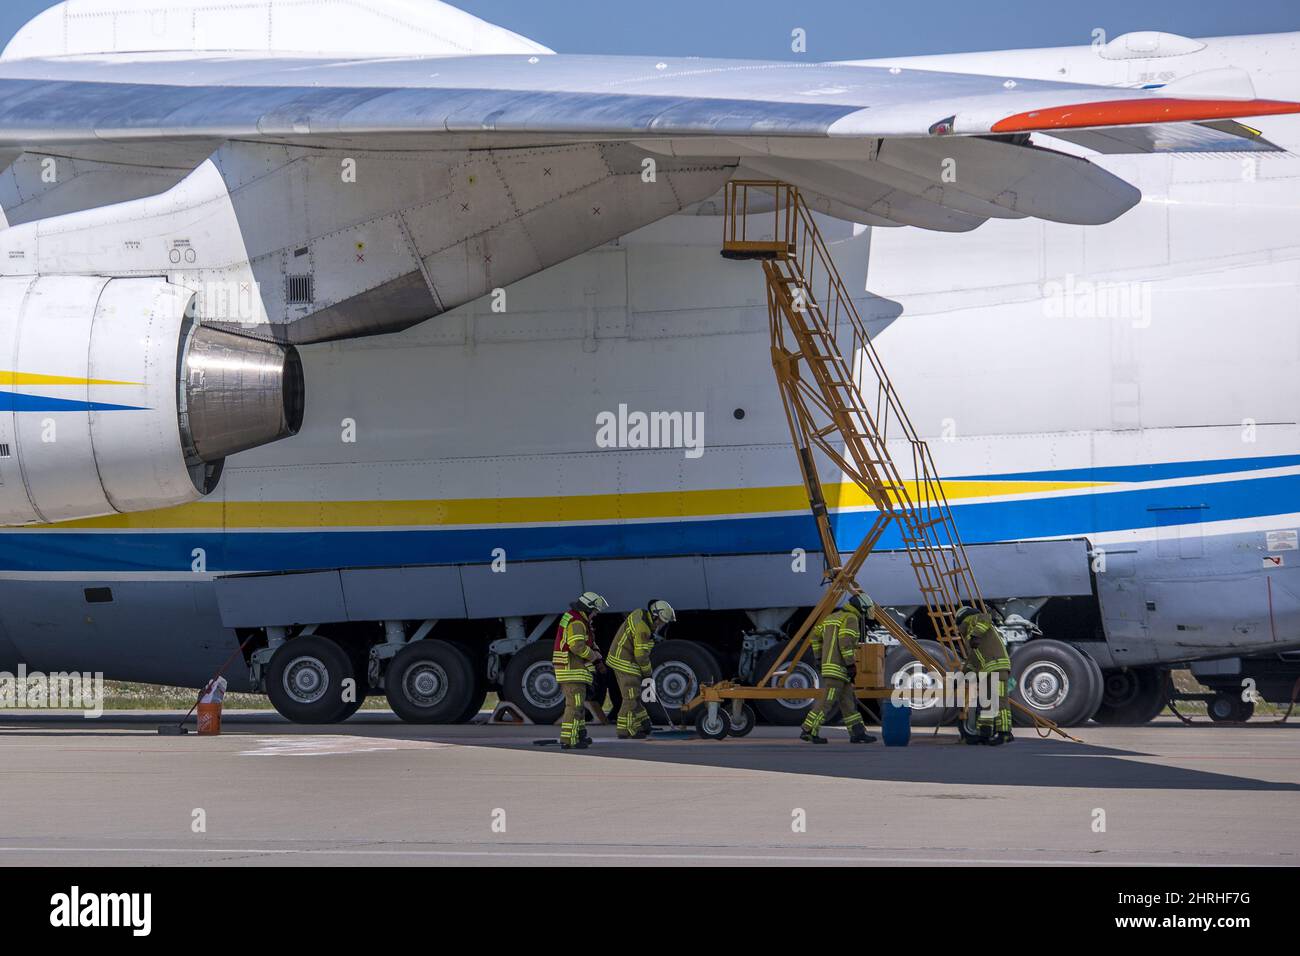 The Antonov AN 225 airplane at Leipzig or Halle airport on a sunny day Stock Photo